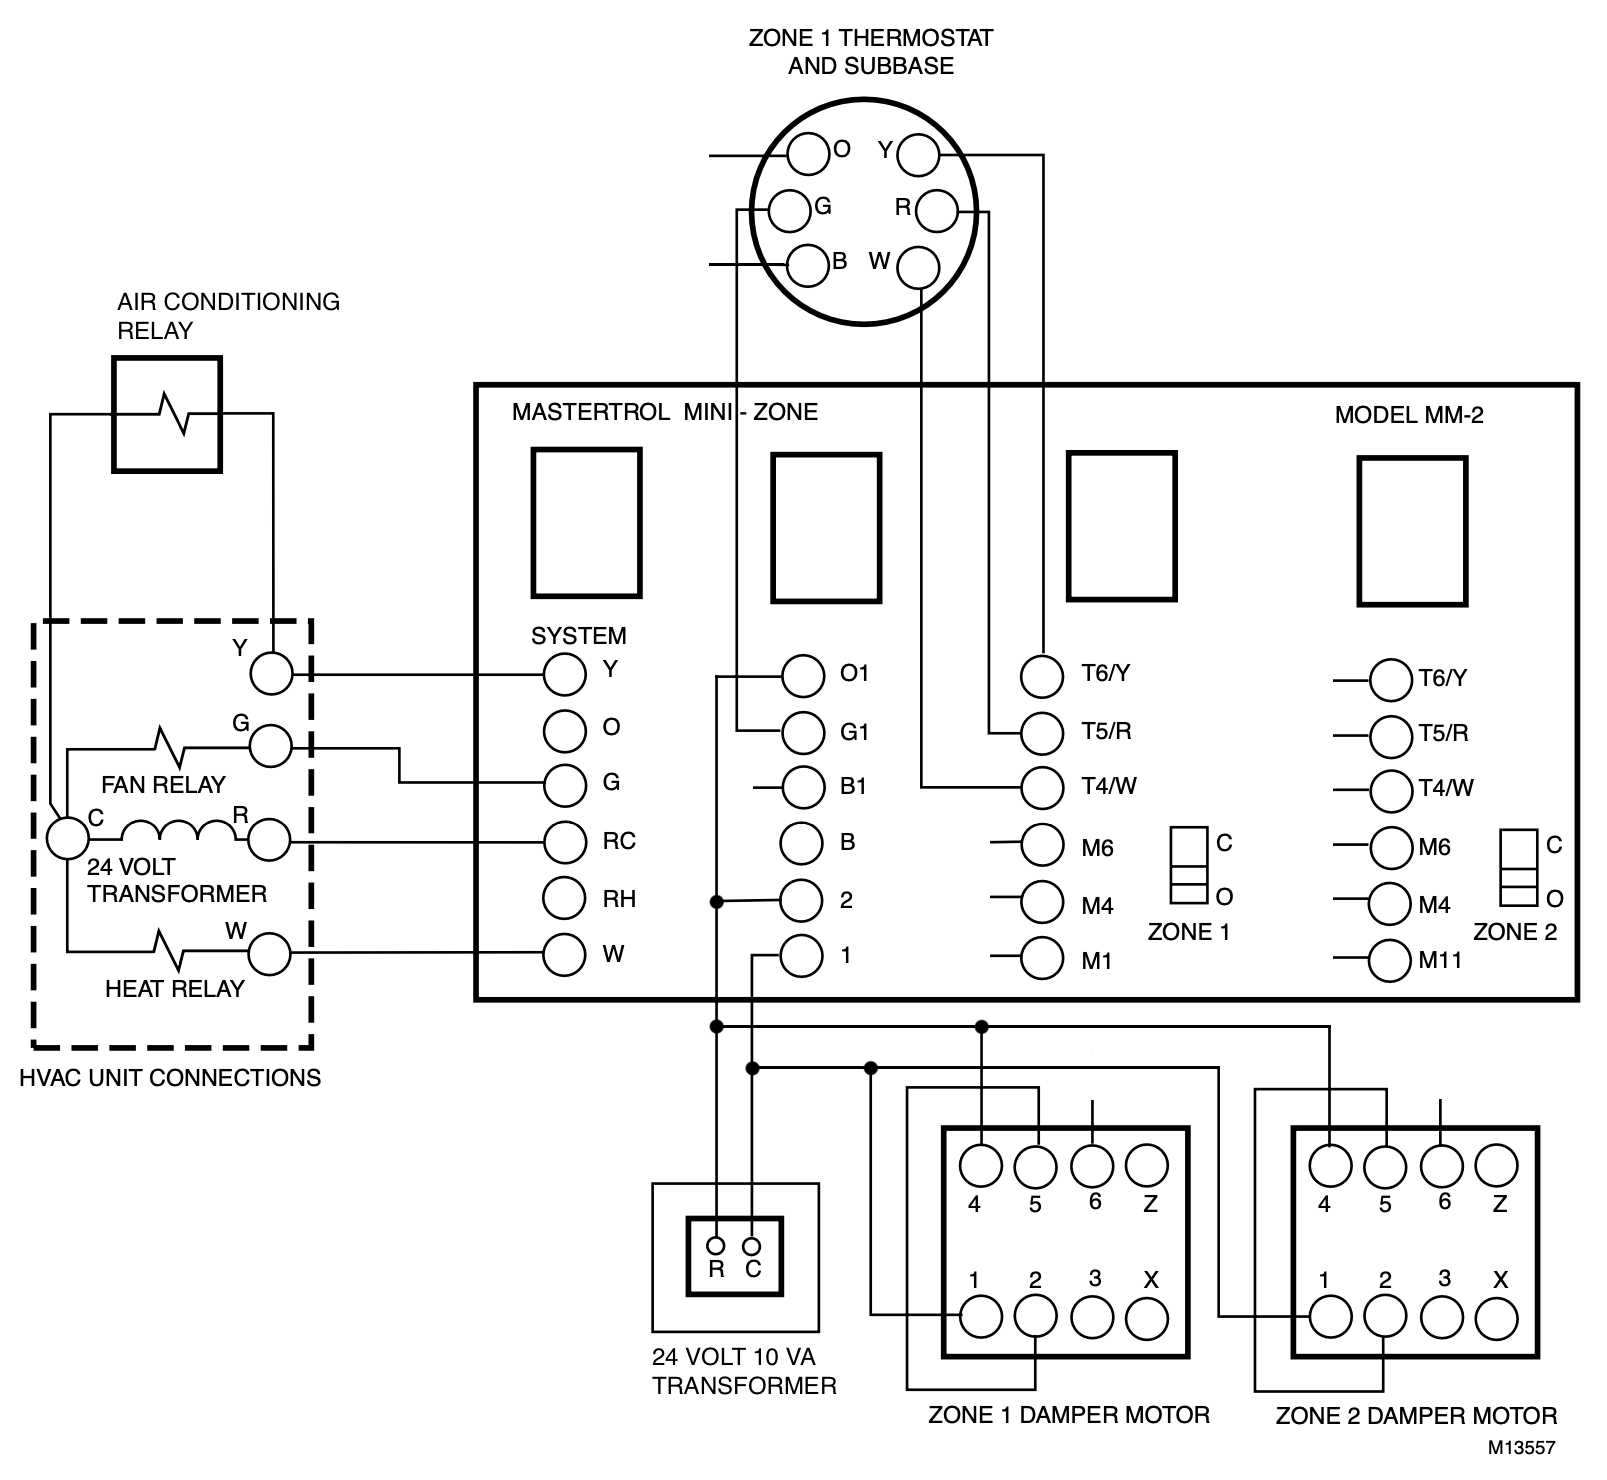 Incorrect wiring of the old zone controller